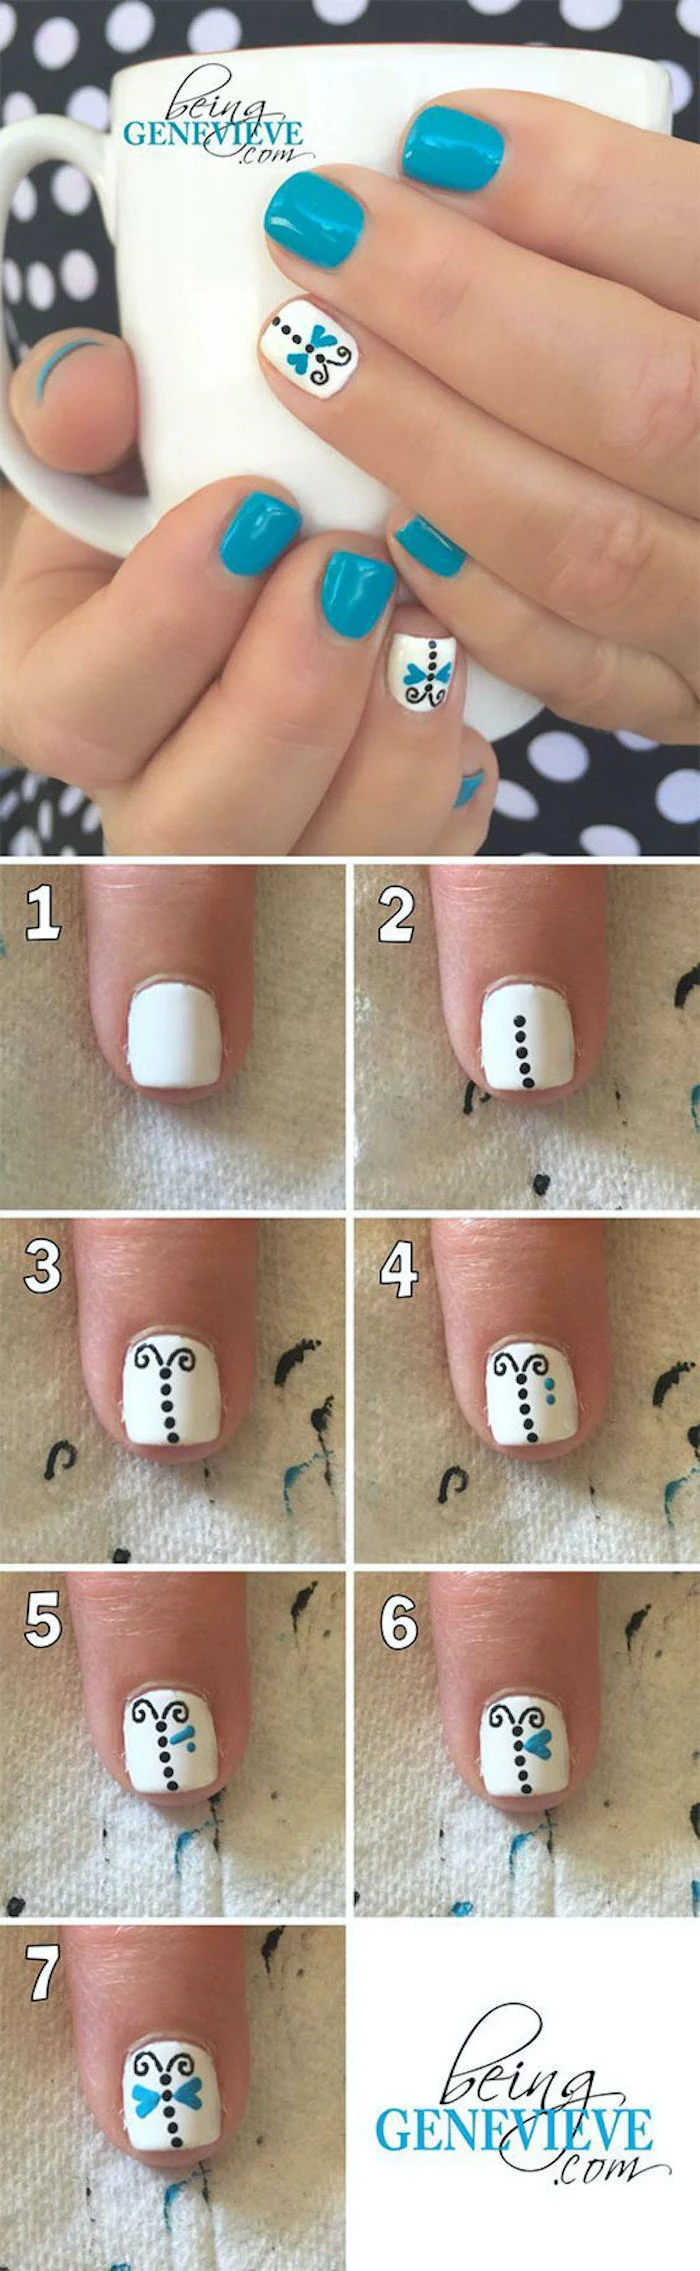 blue and white nail polish, butterflies decorations, vacation nails, step by step diy tutorial